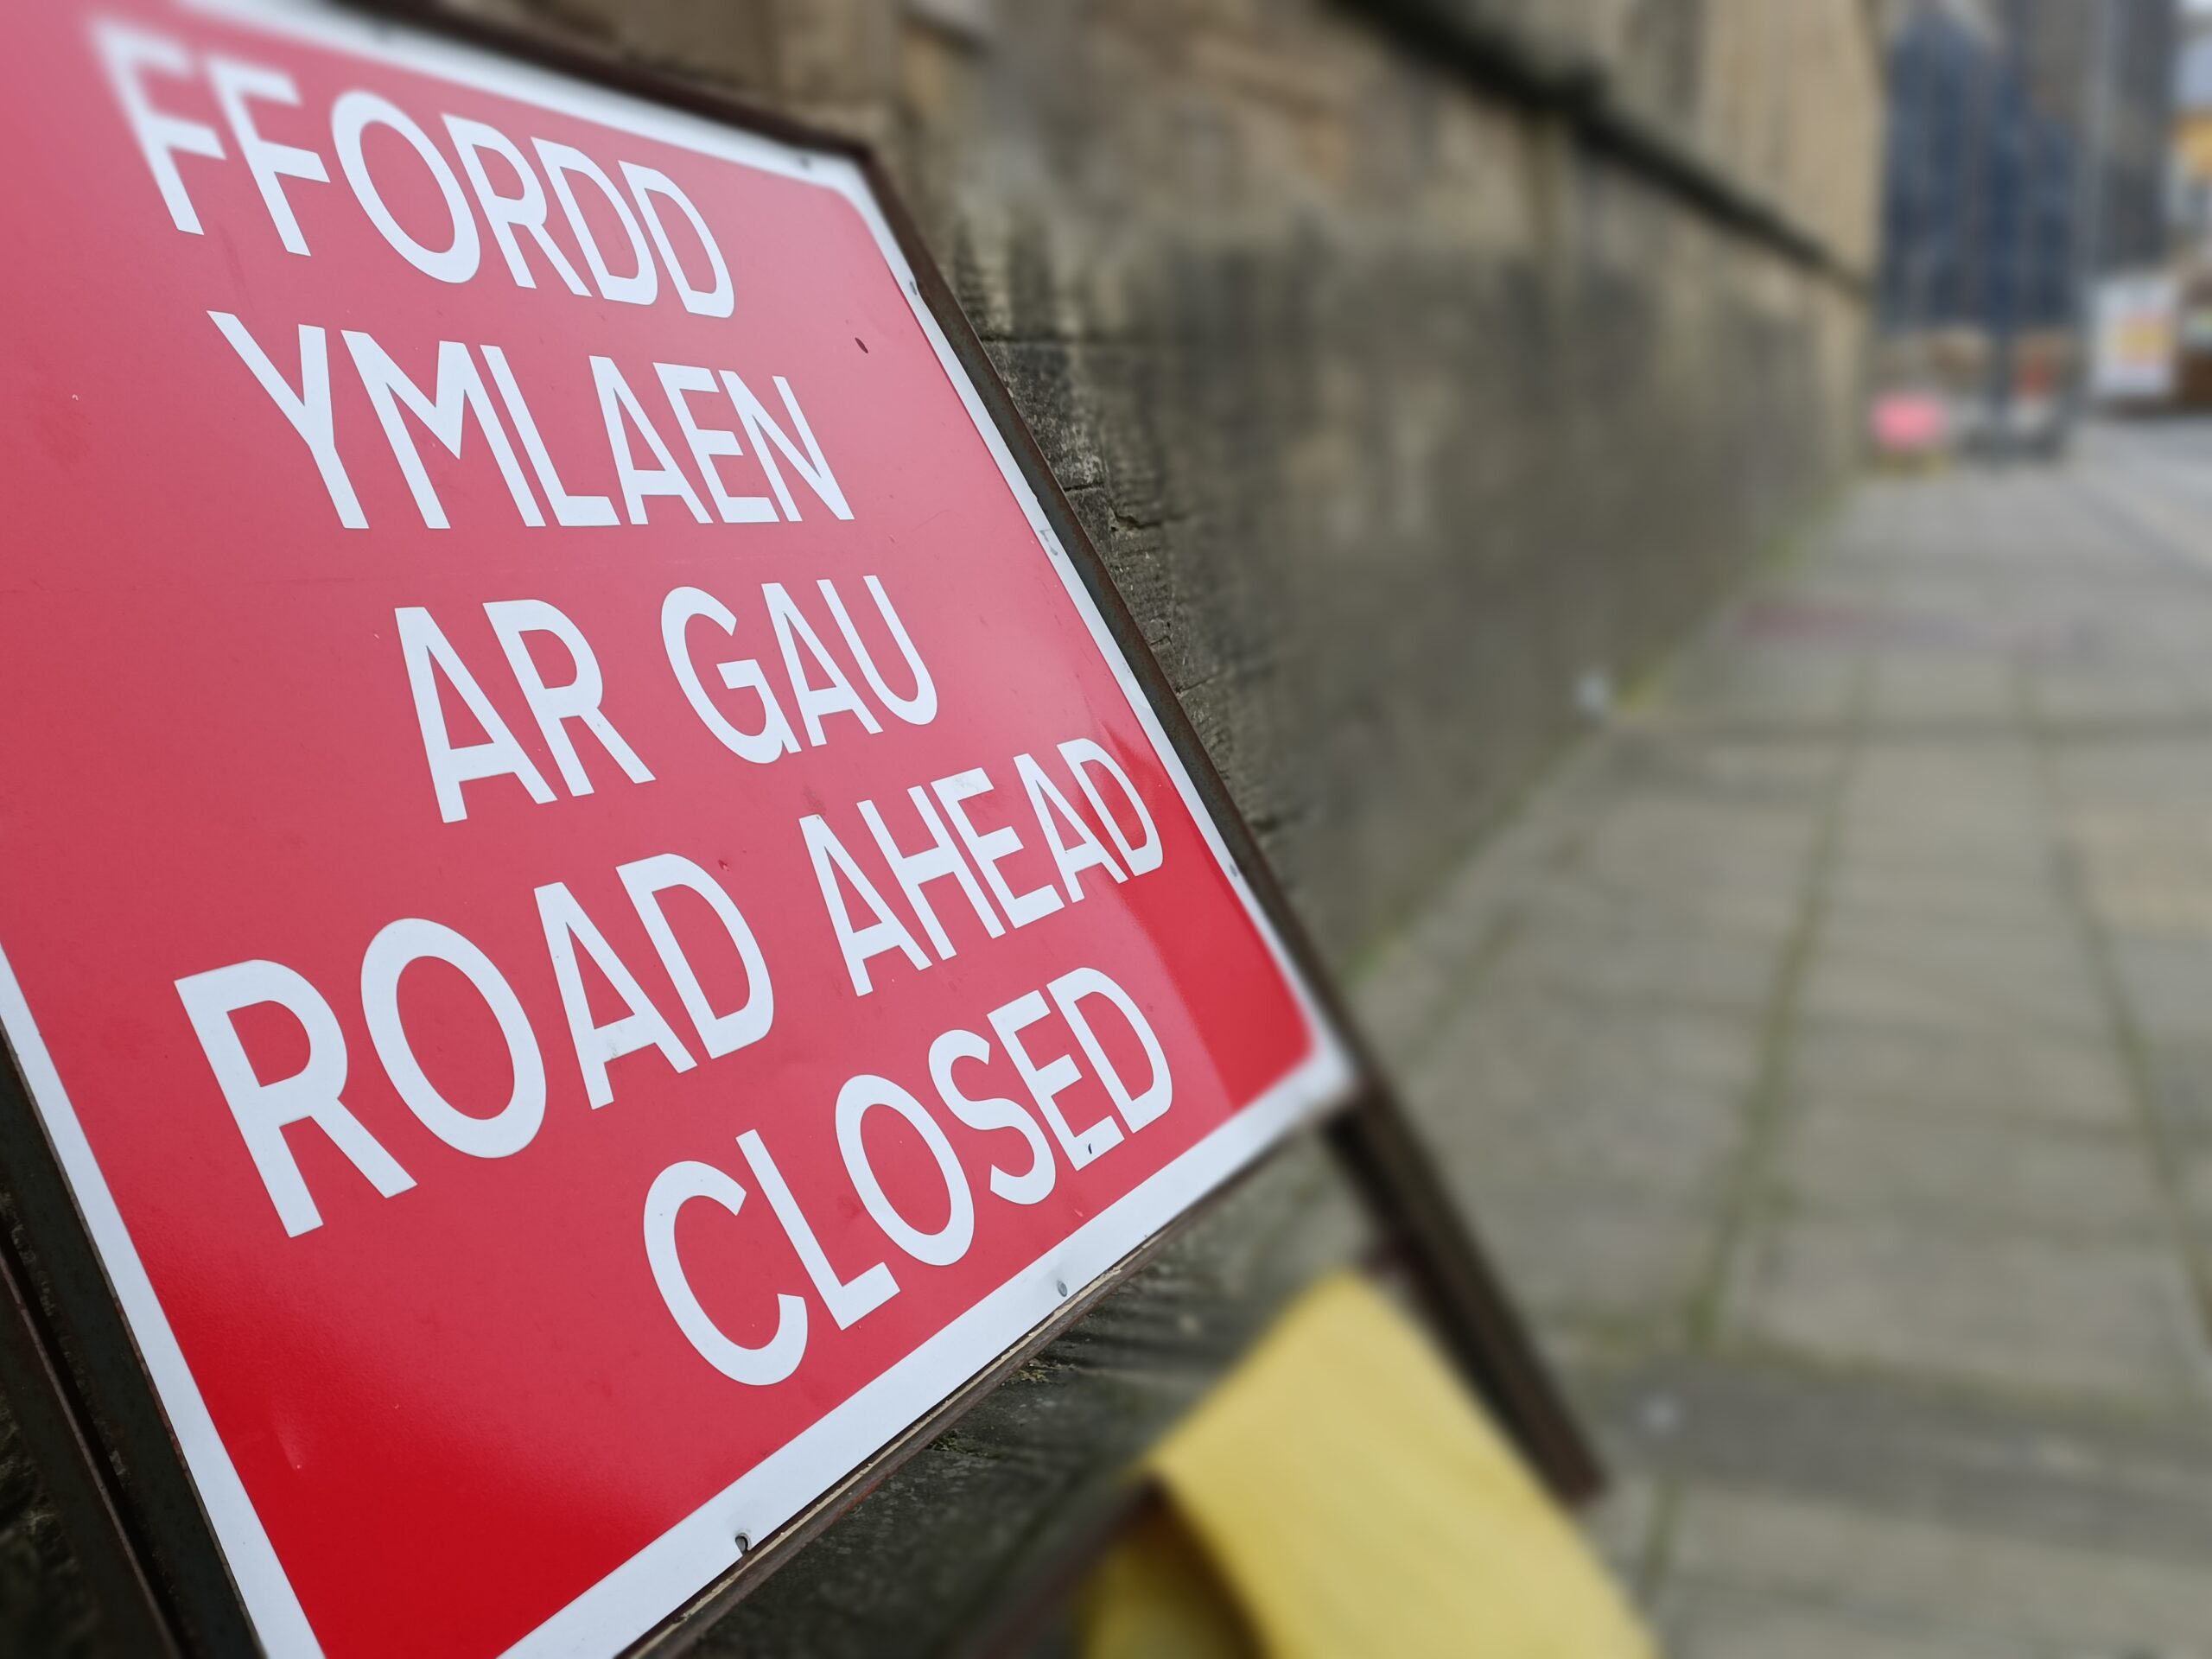 Bronwydd road will be subject to full road closure from Monday